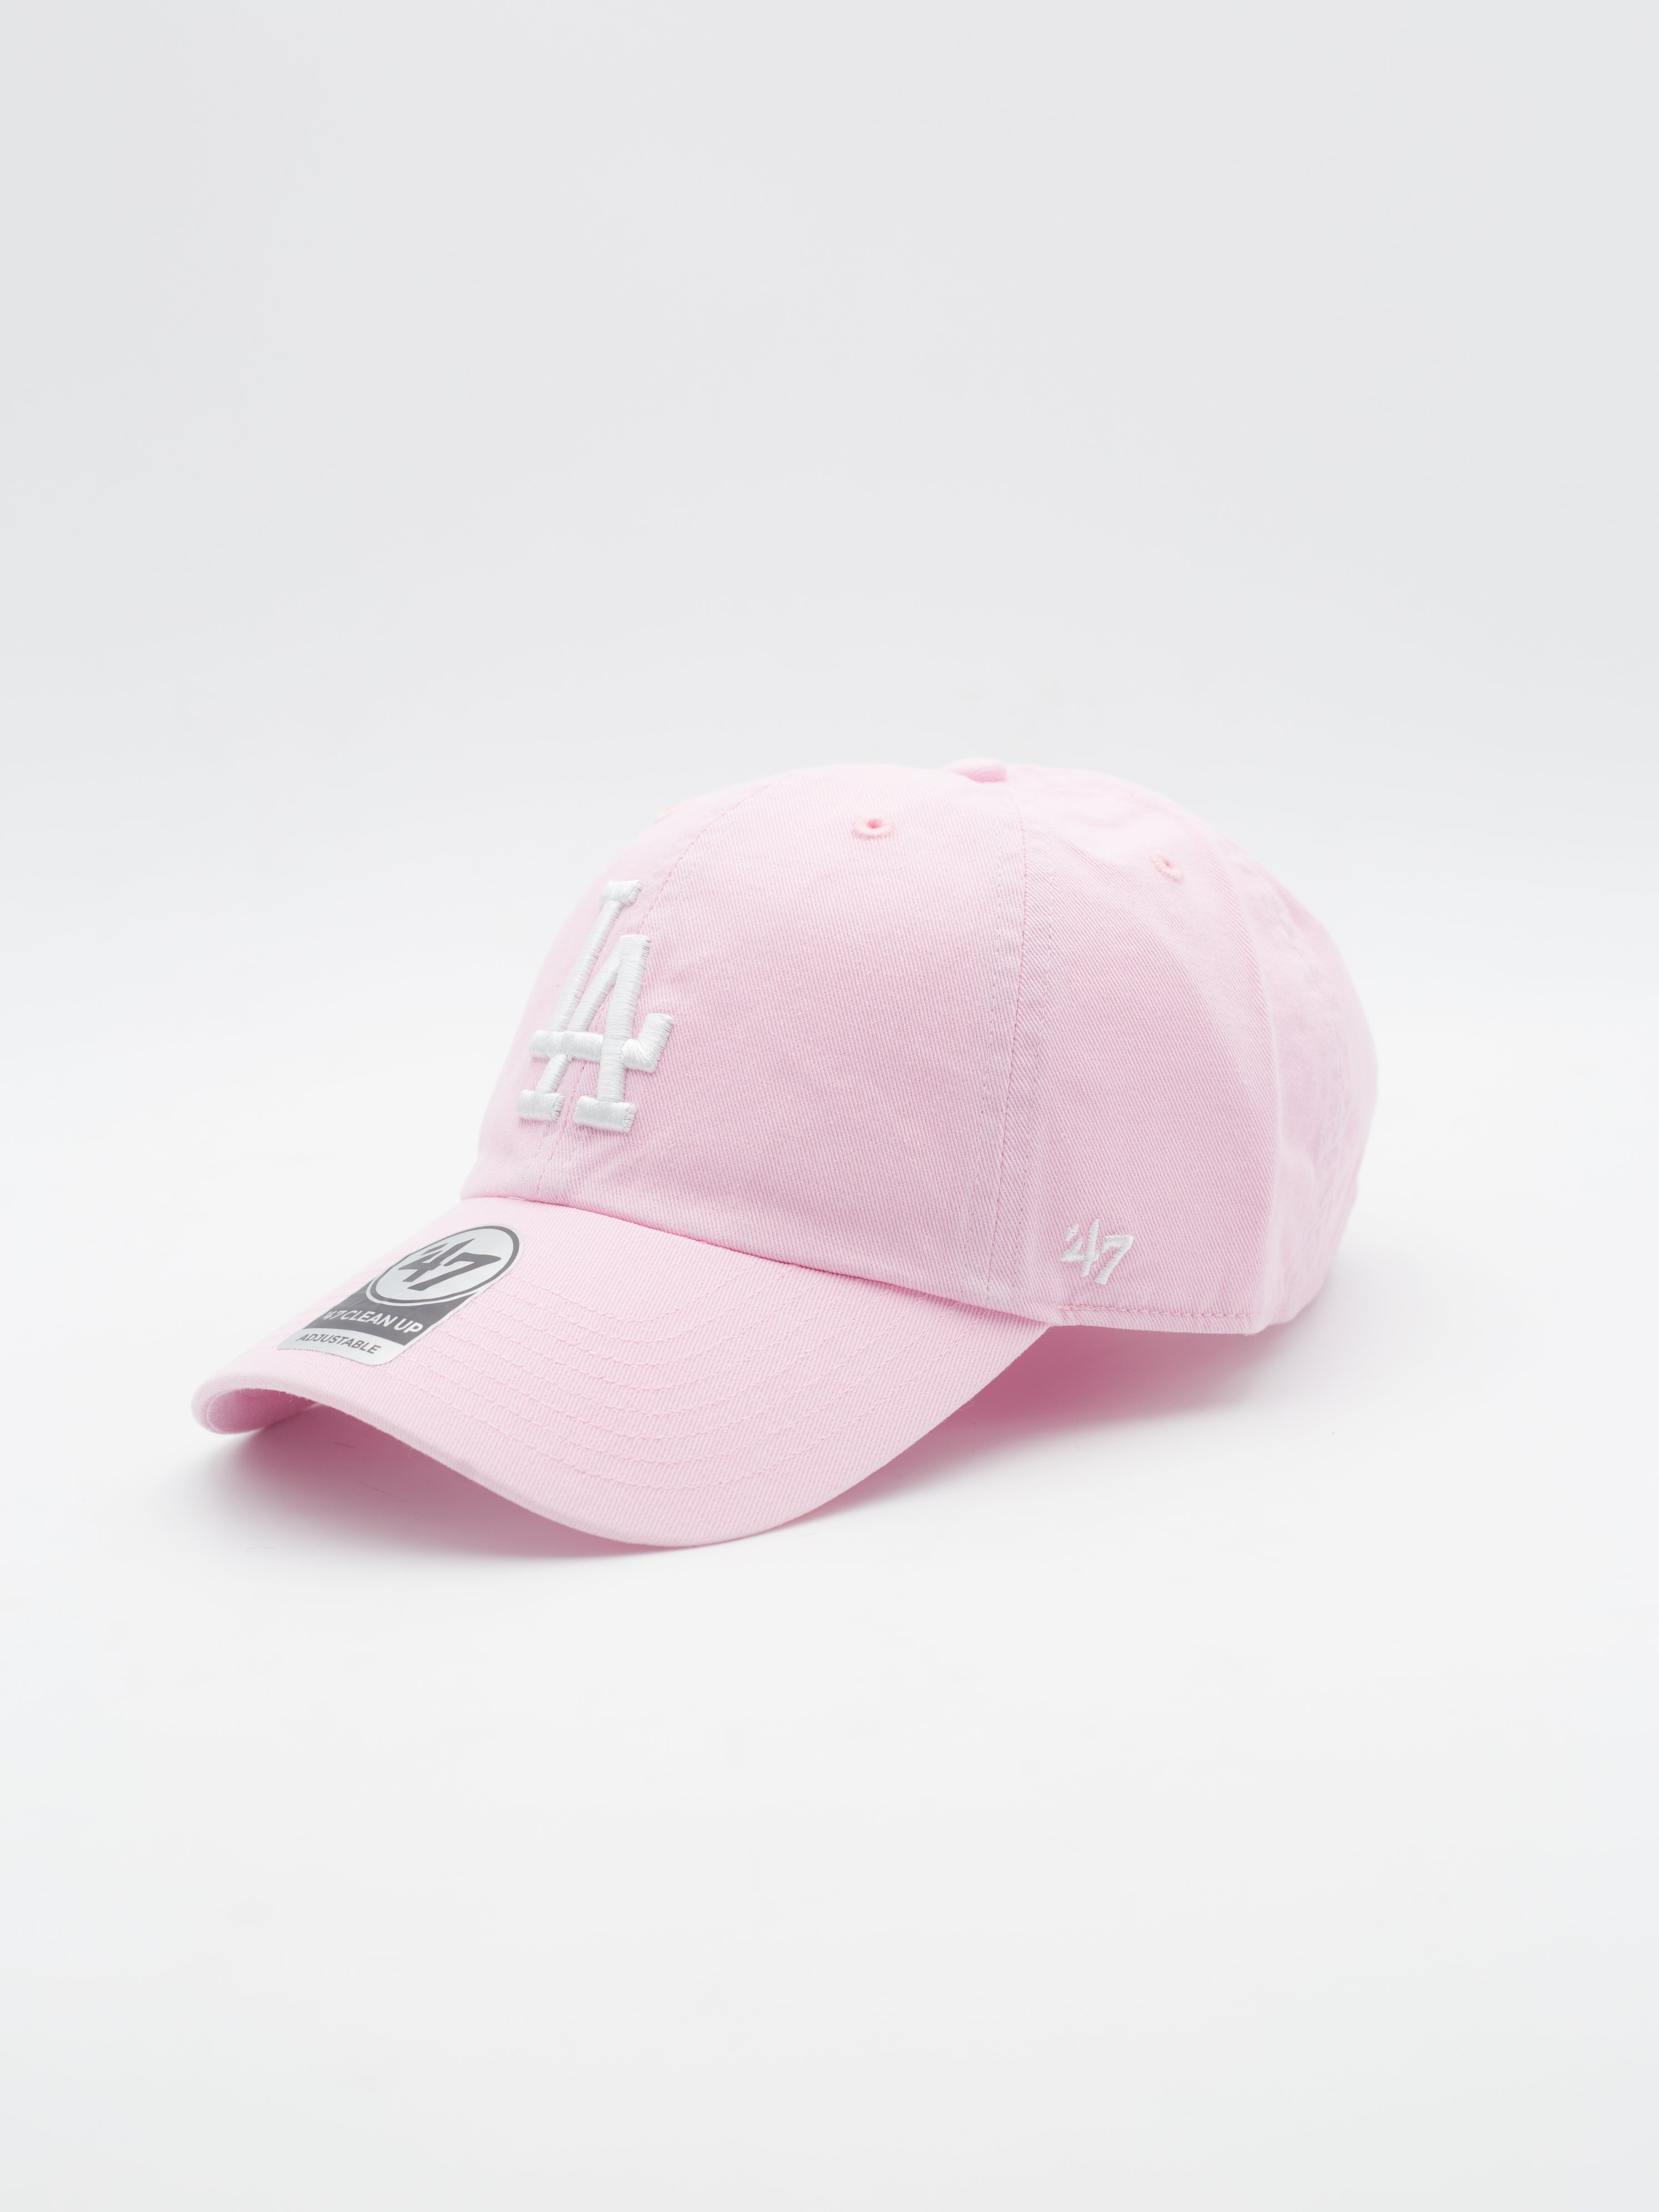 CLEAN UP Los Angeles Dodgers Pink